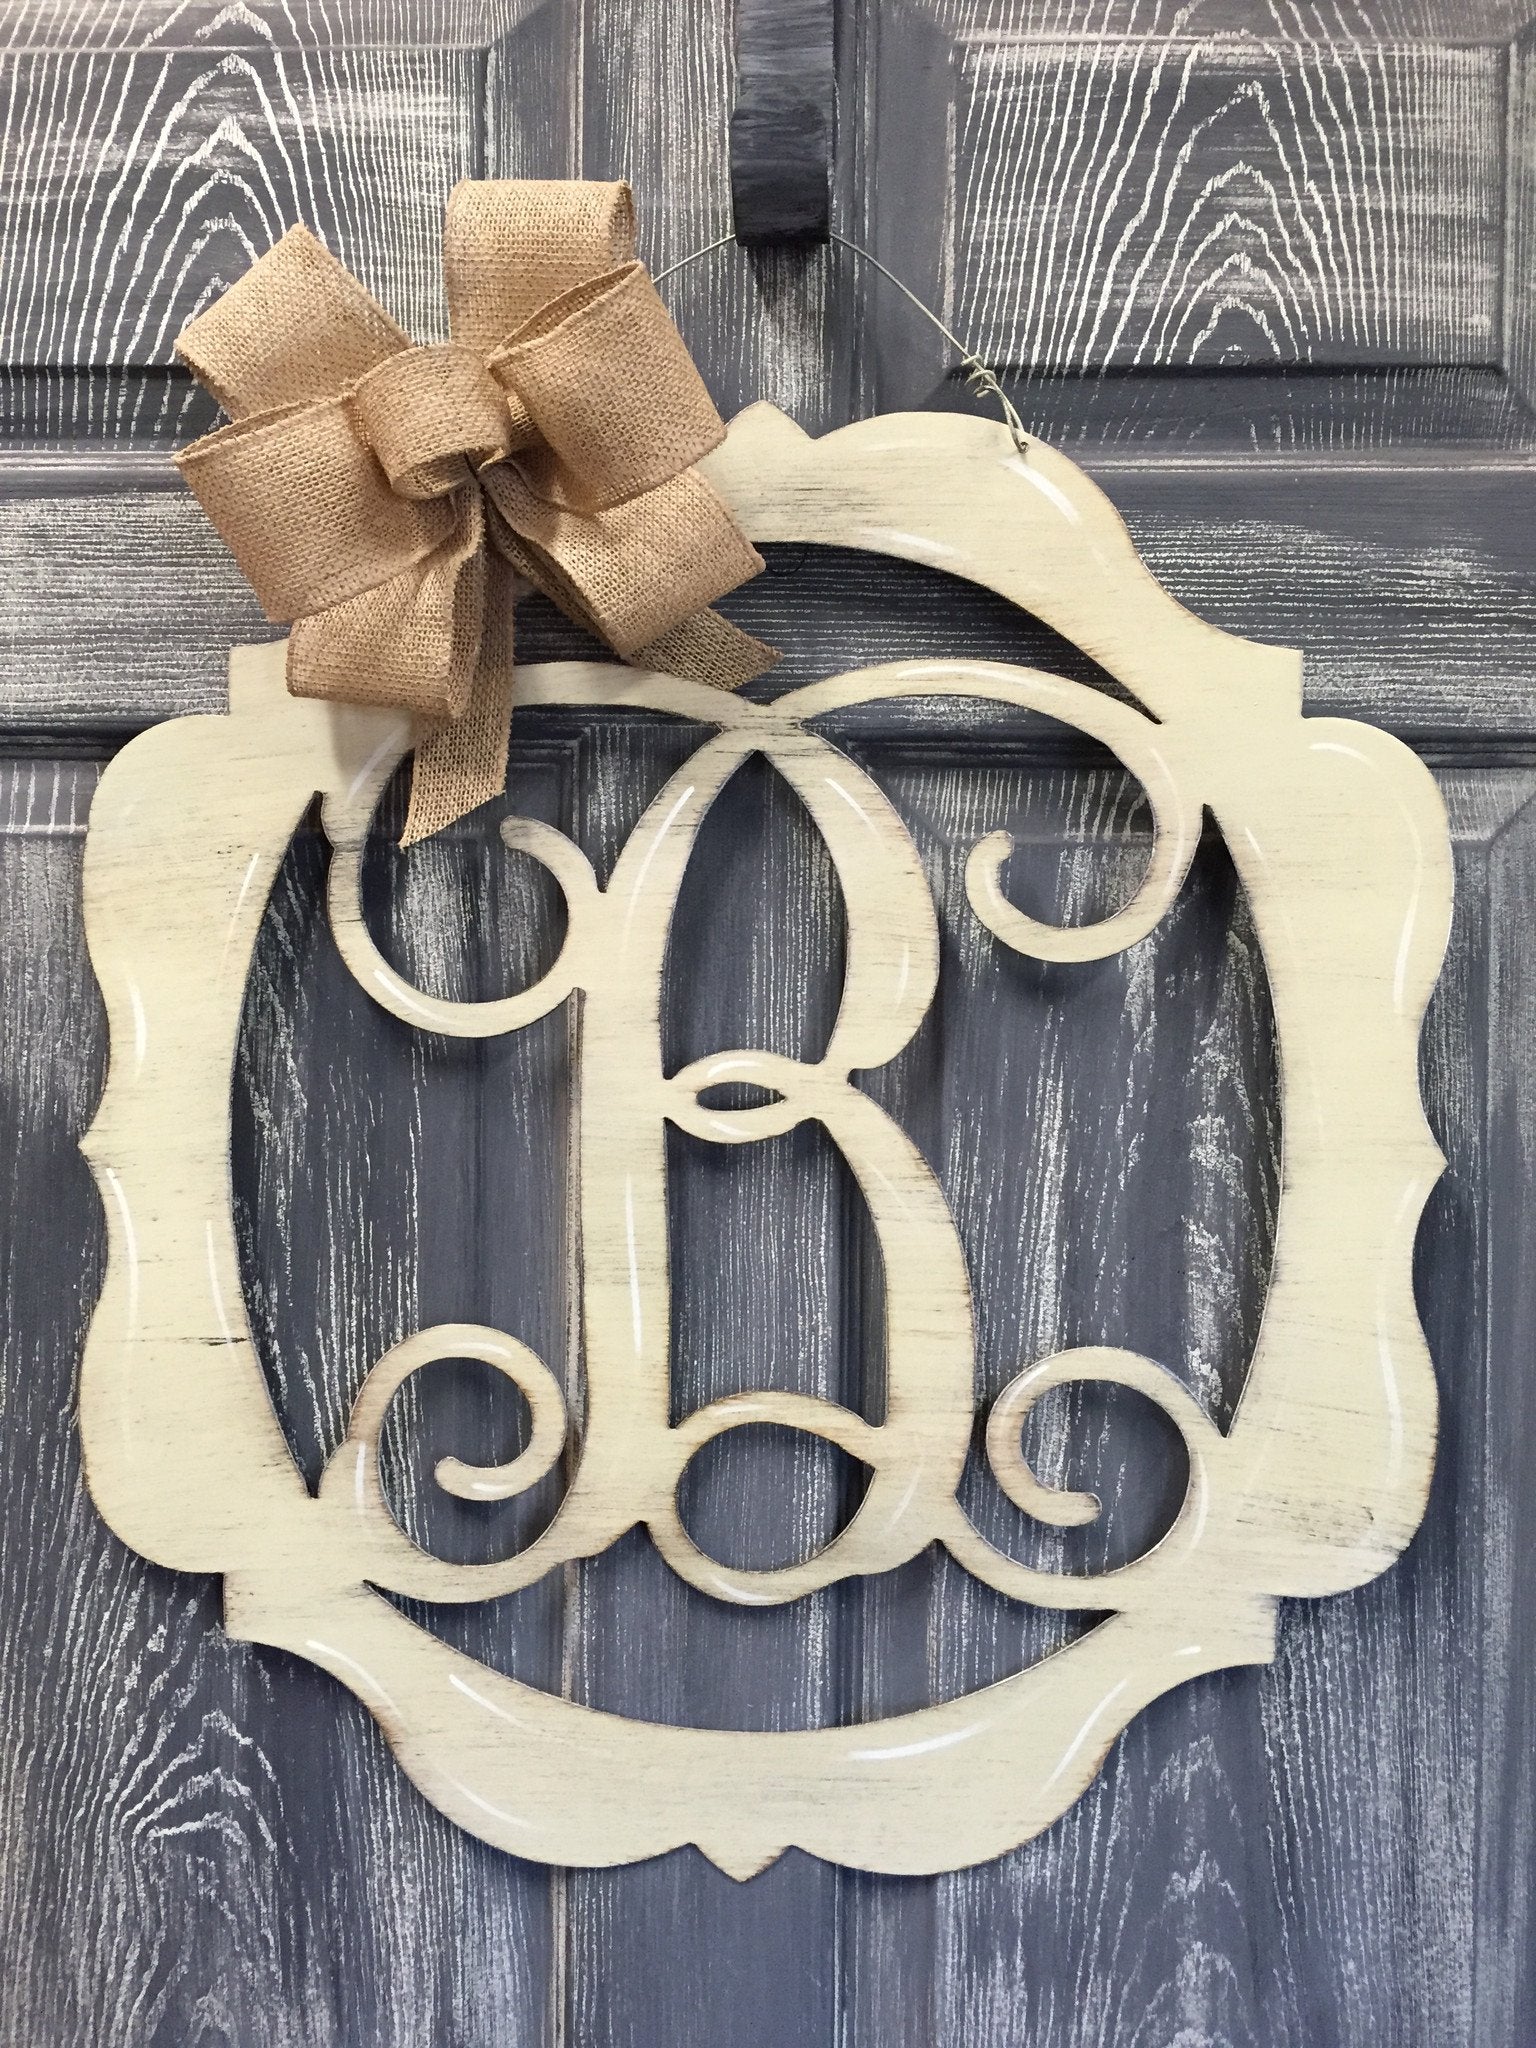 Monogrammed Mirrored Initial Door Hanger 23"x21" More Colors Available